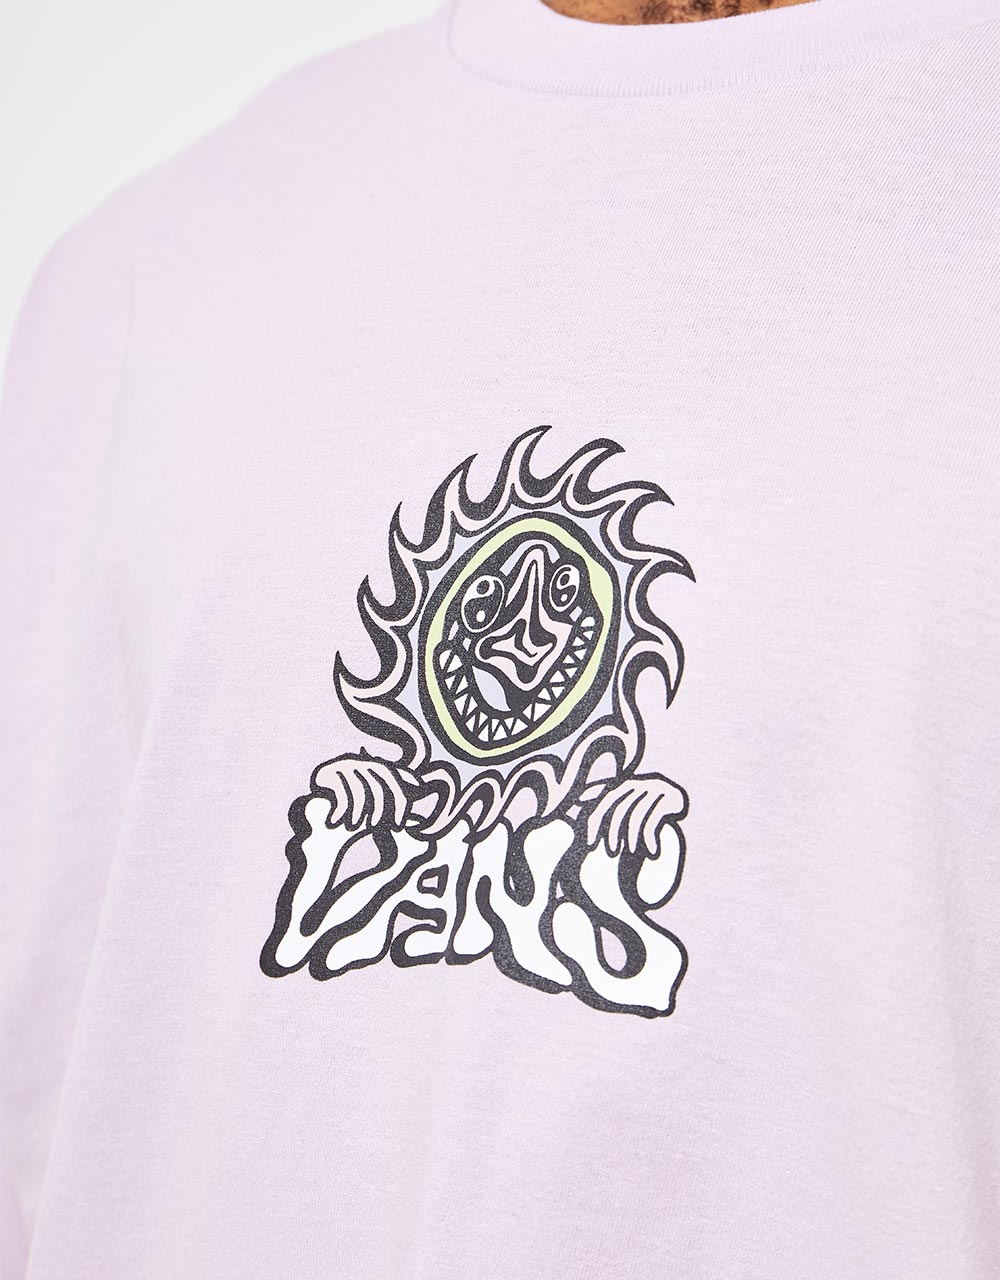 Vans Off The Wall Skate Classic T-Shirt - Lavender Frost